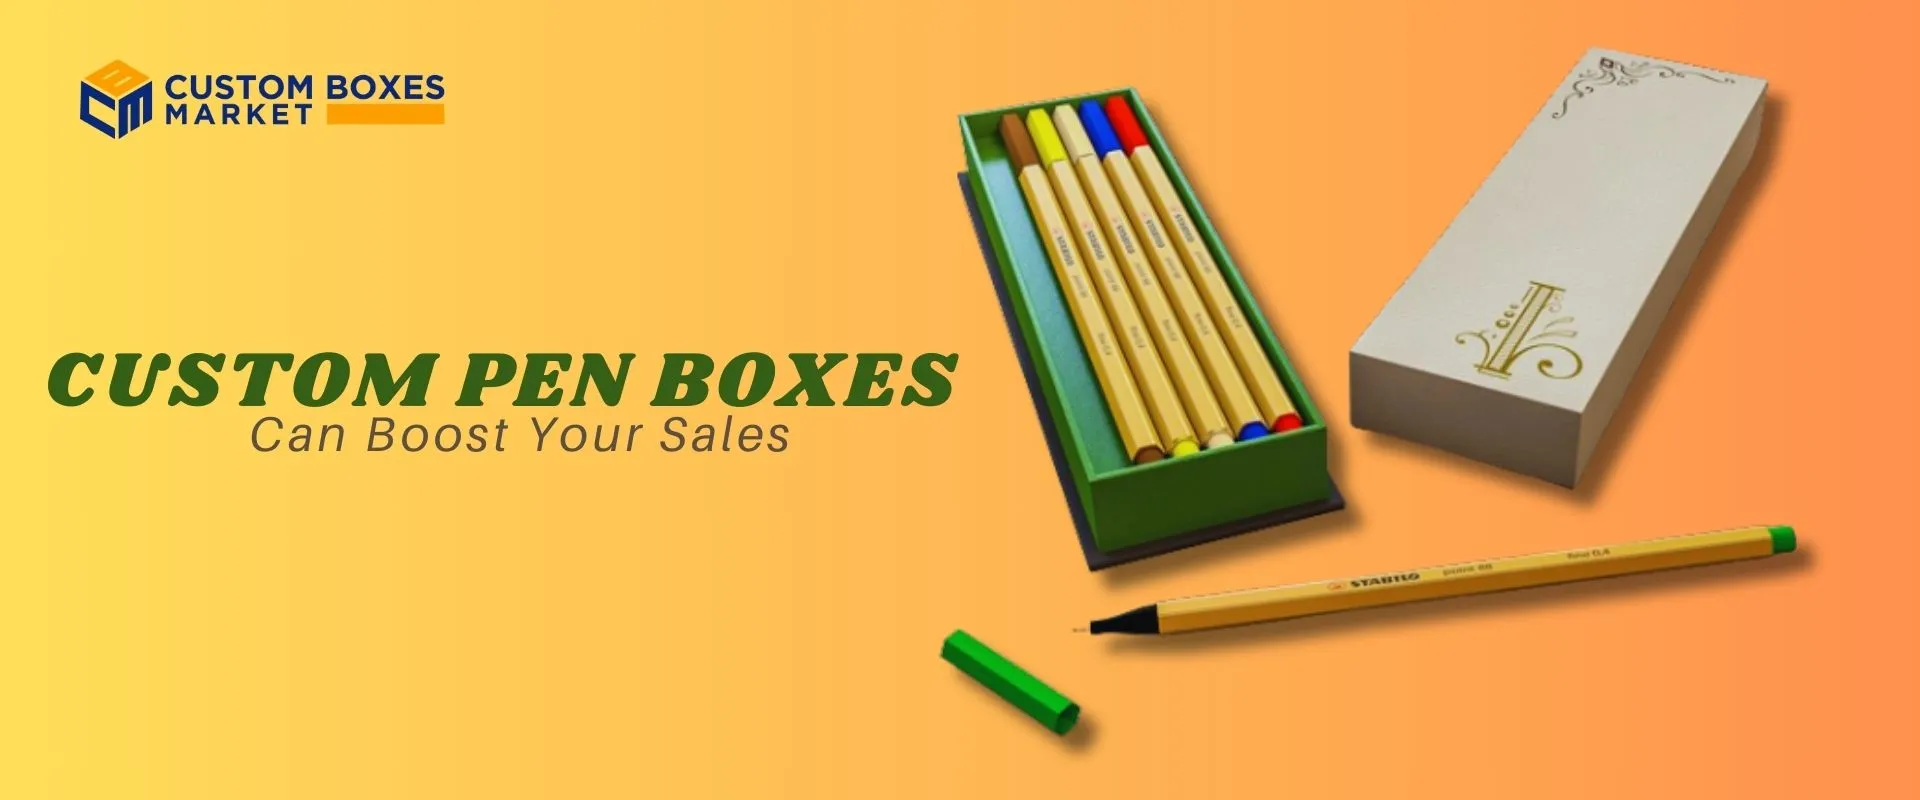 How Custom Pen Boxes Can Boost Your Sales?